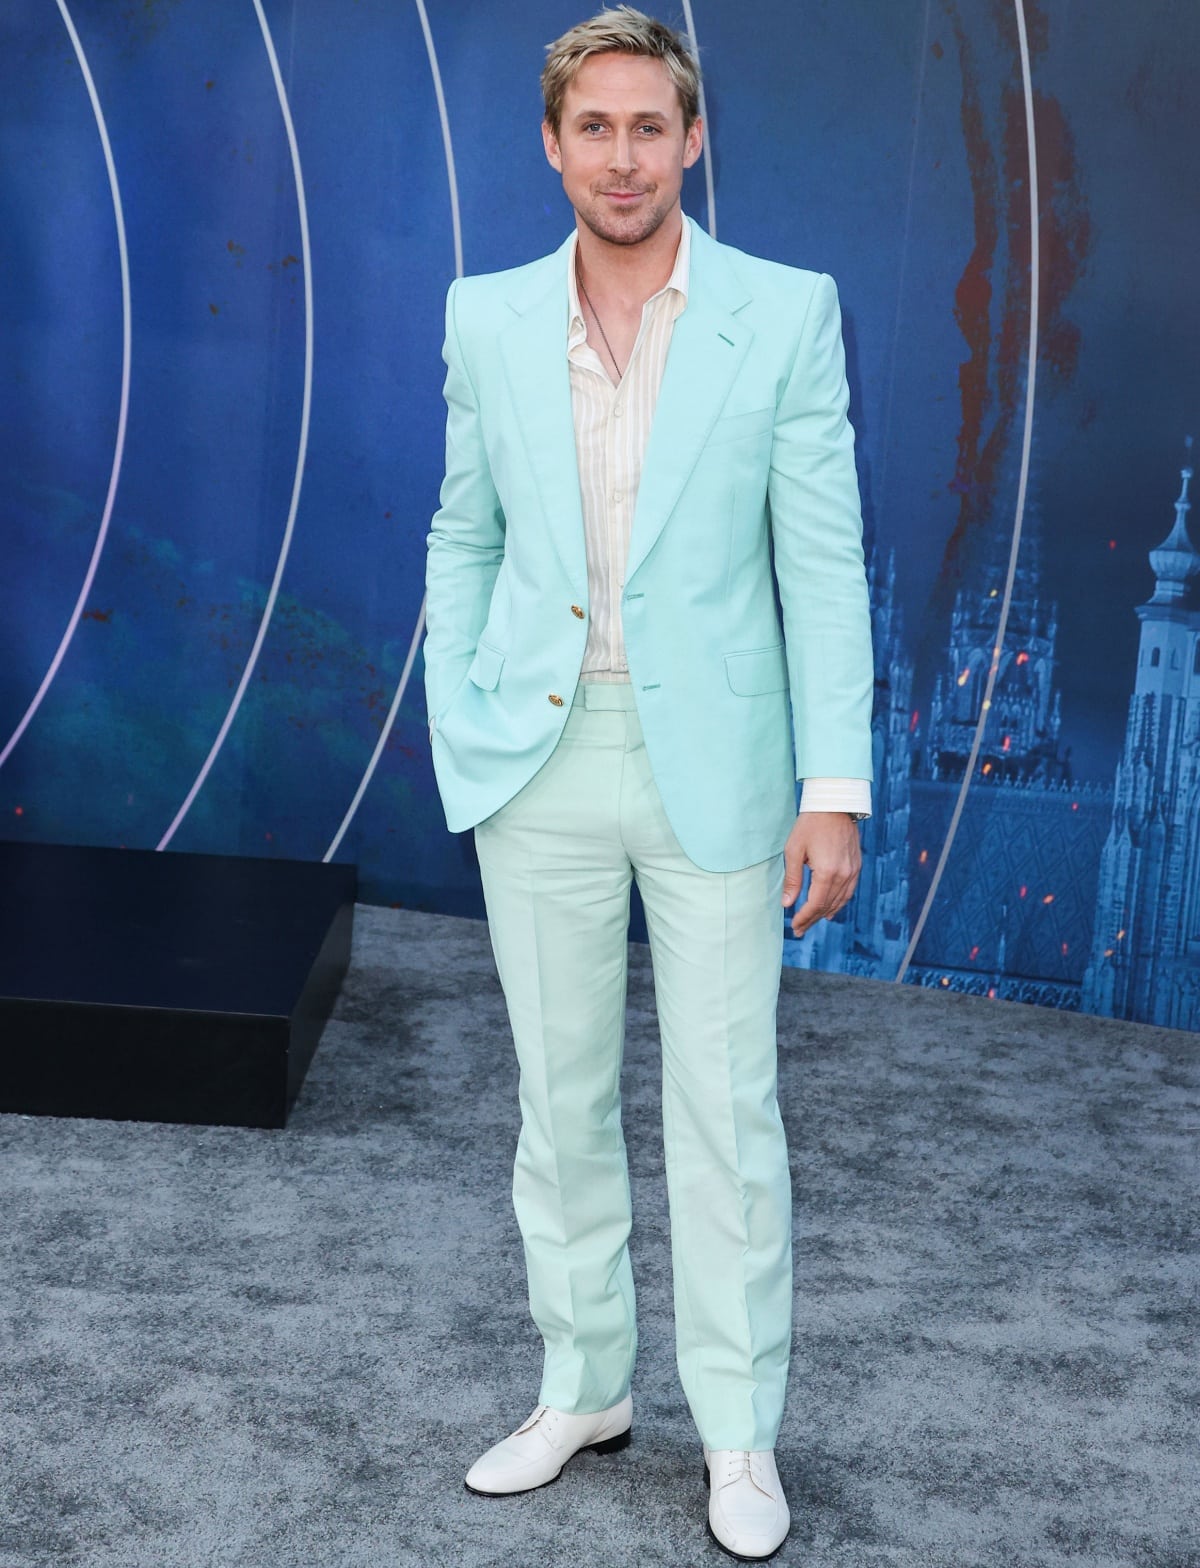 Ryan Gosling turning heads in a refreshing Gucci summer look with ivory leather brogues